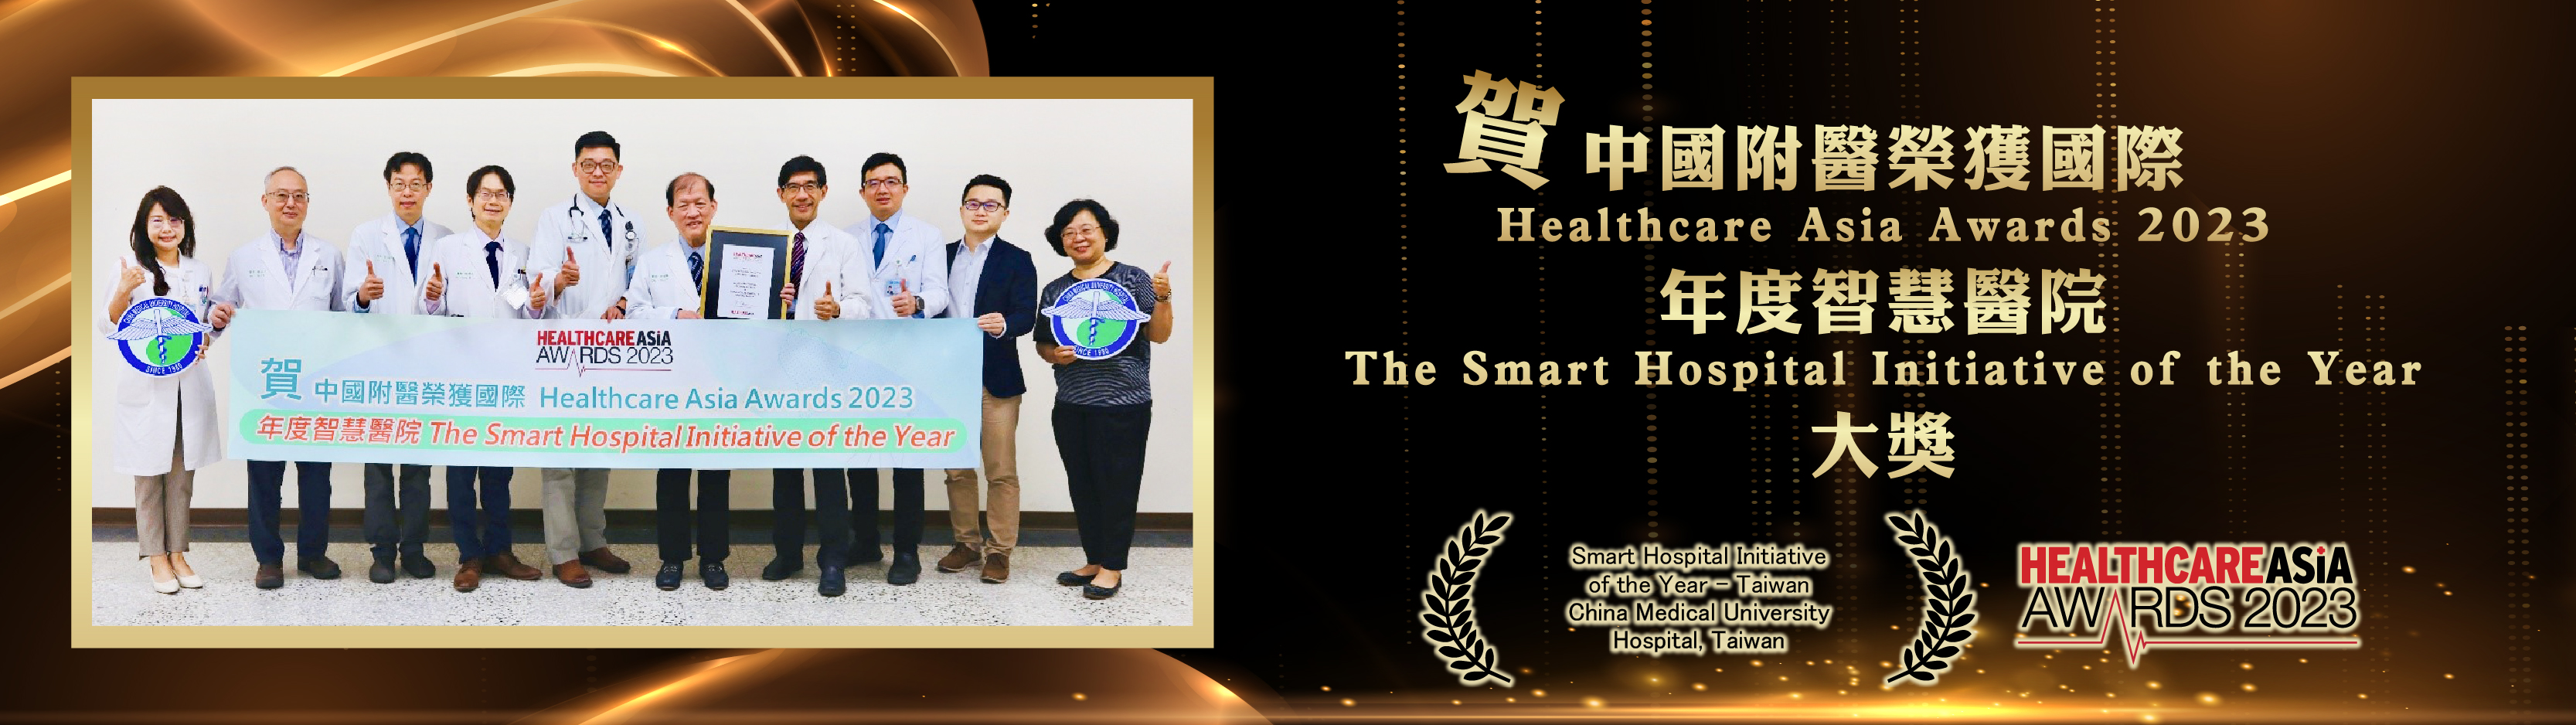 CMUH has earned global recognition for its successful digital transformation by winning the "Smart Hospital Initiative of the Year" award. The International Medicine National Team has helped the government facilitate the New Southbound Policy and raised awareness of Taiwan on the international stage